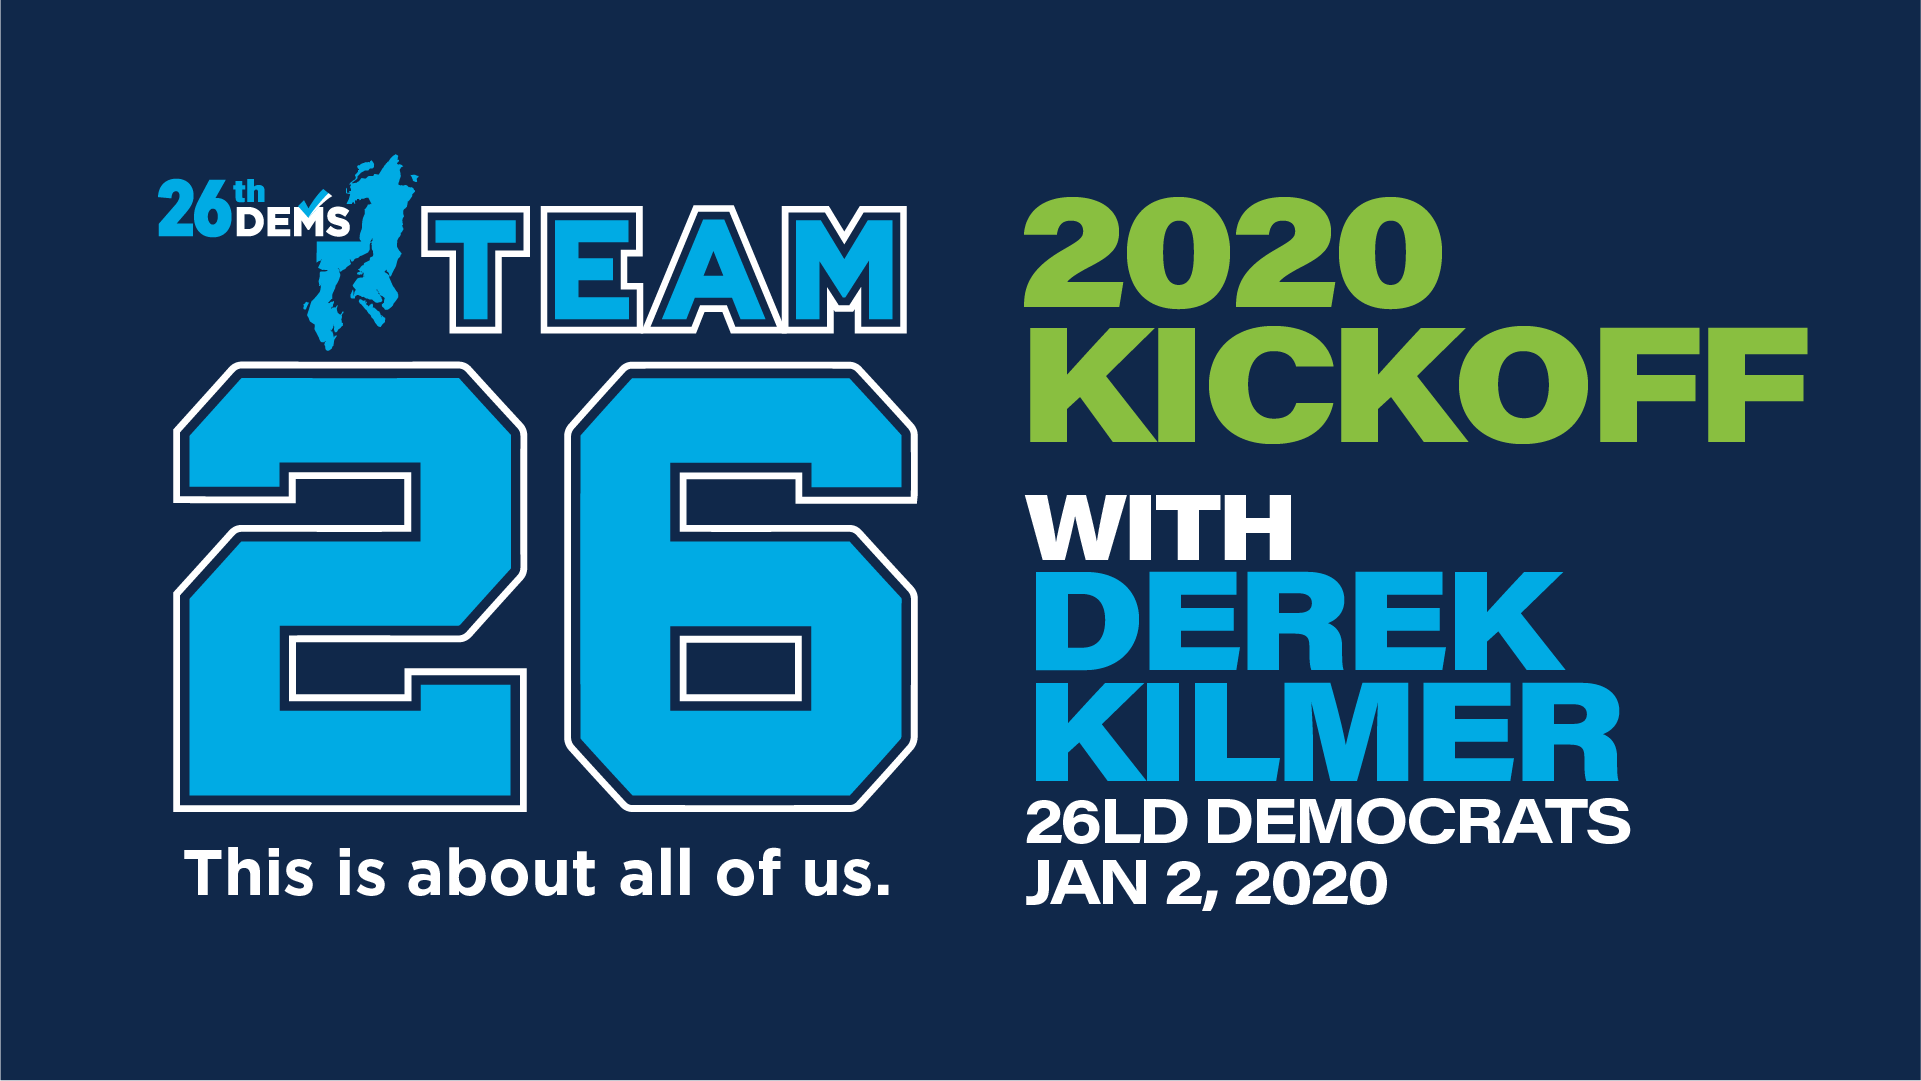   January 2, 2020 General Meeting LOCATION: Givens Community Center – 1026 Sidney Ave Port Orchard, WA 98366 START TIME: Potluck/Social –  6:00 PM Meeting called to order – 6:30 PM KICKOFF 2020 SPEAKERS: Congressman Derek Kilmer State Senator Emily Randall State House Candidates Evan Koepfler, Field Organizer PROGRAM: TEAM 26 KICKOFF 2020 – This is about […]